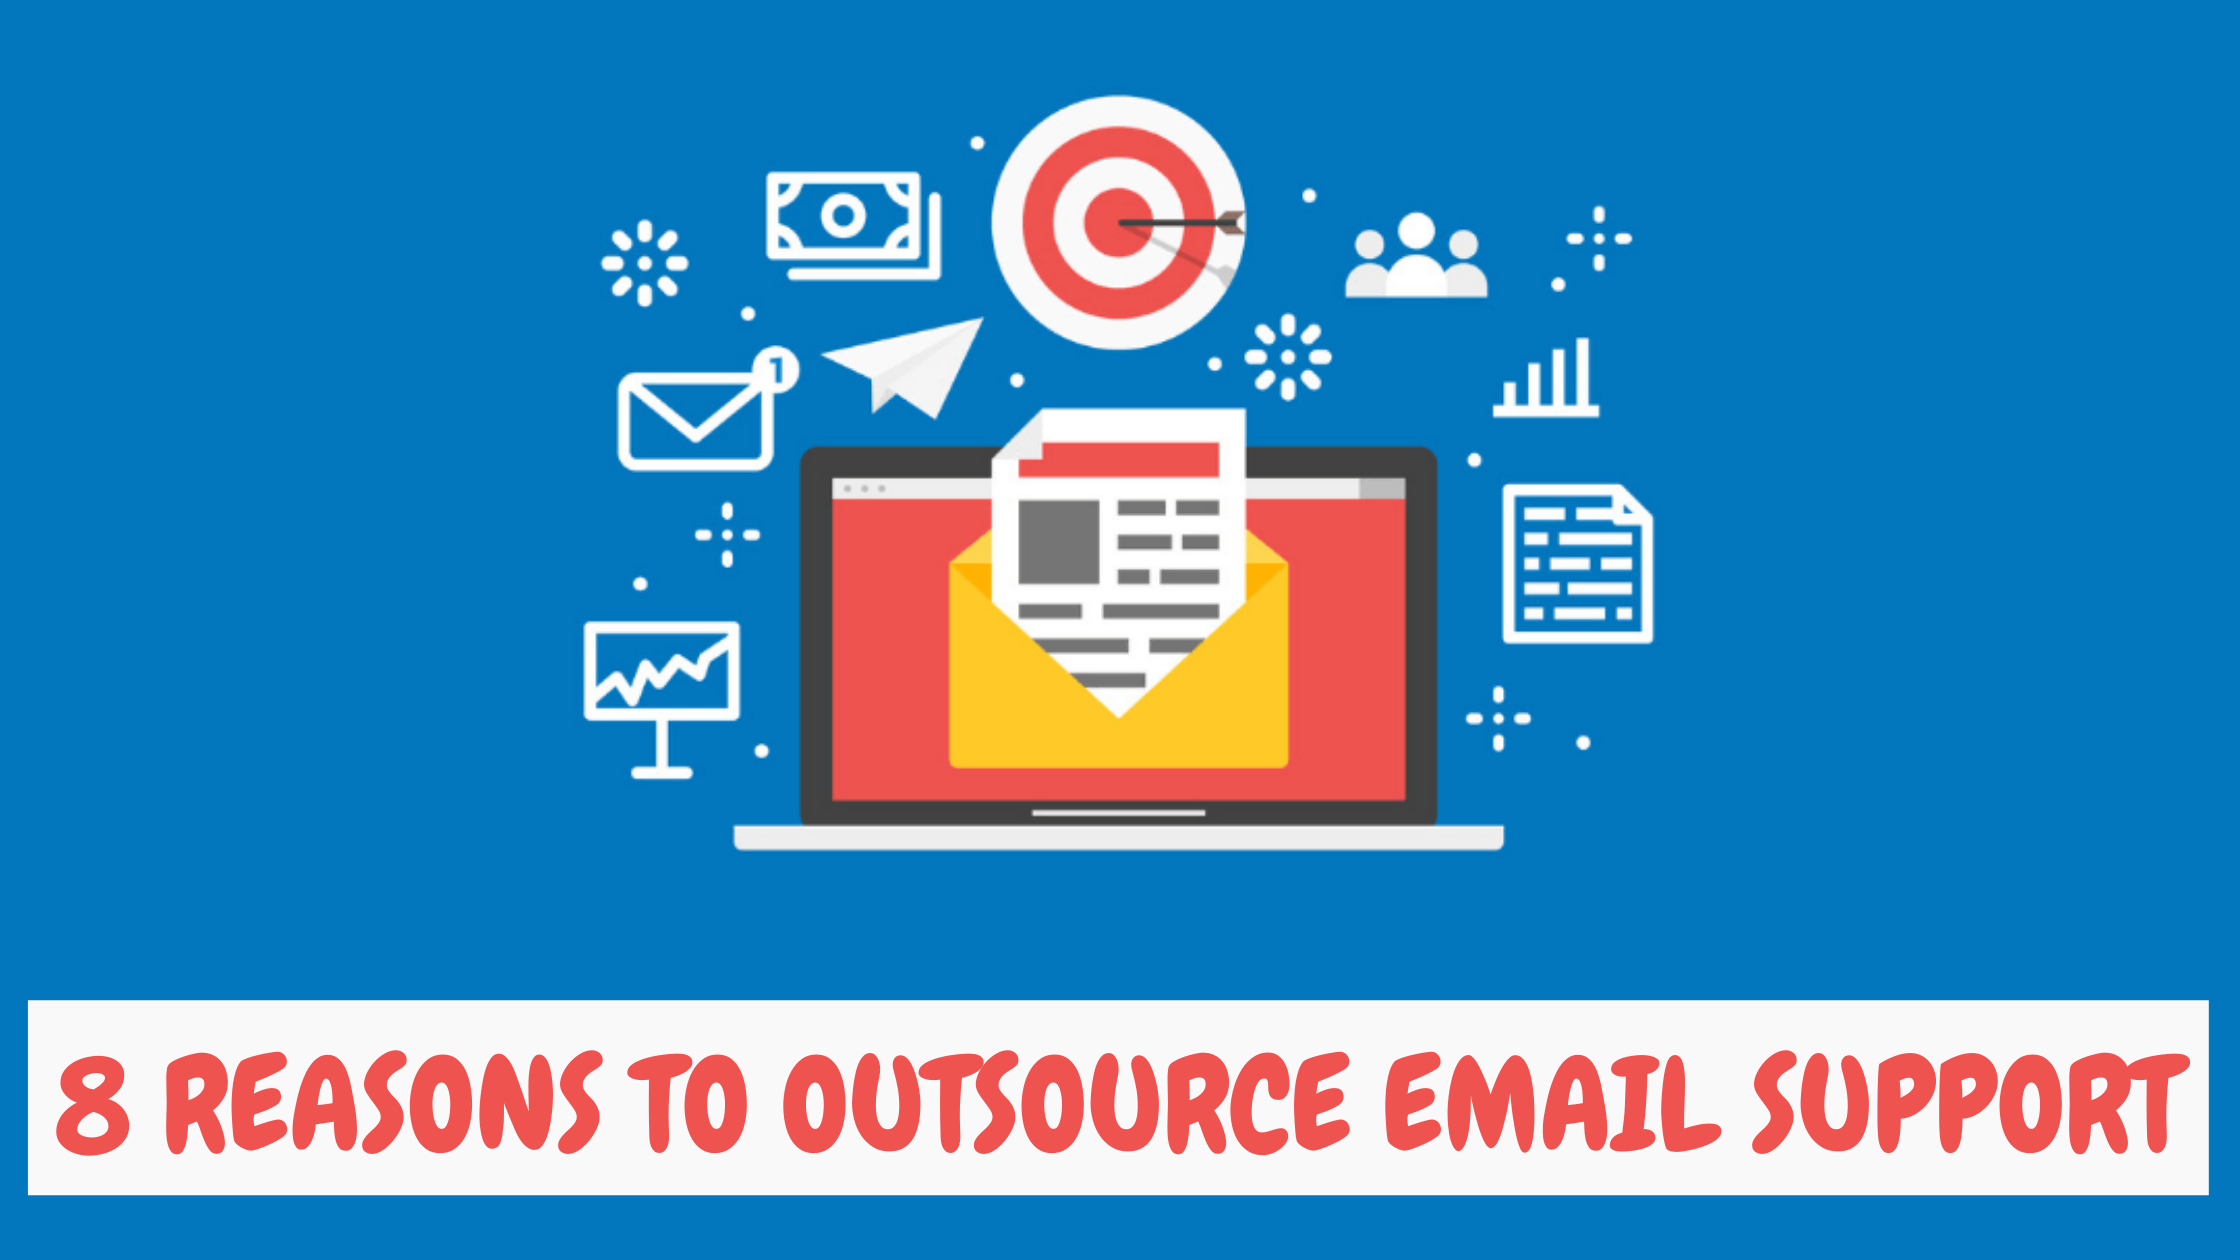 8 Reasons to Outsource Email Support